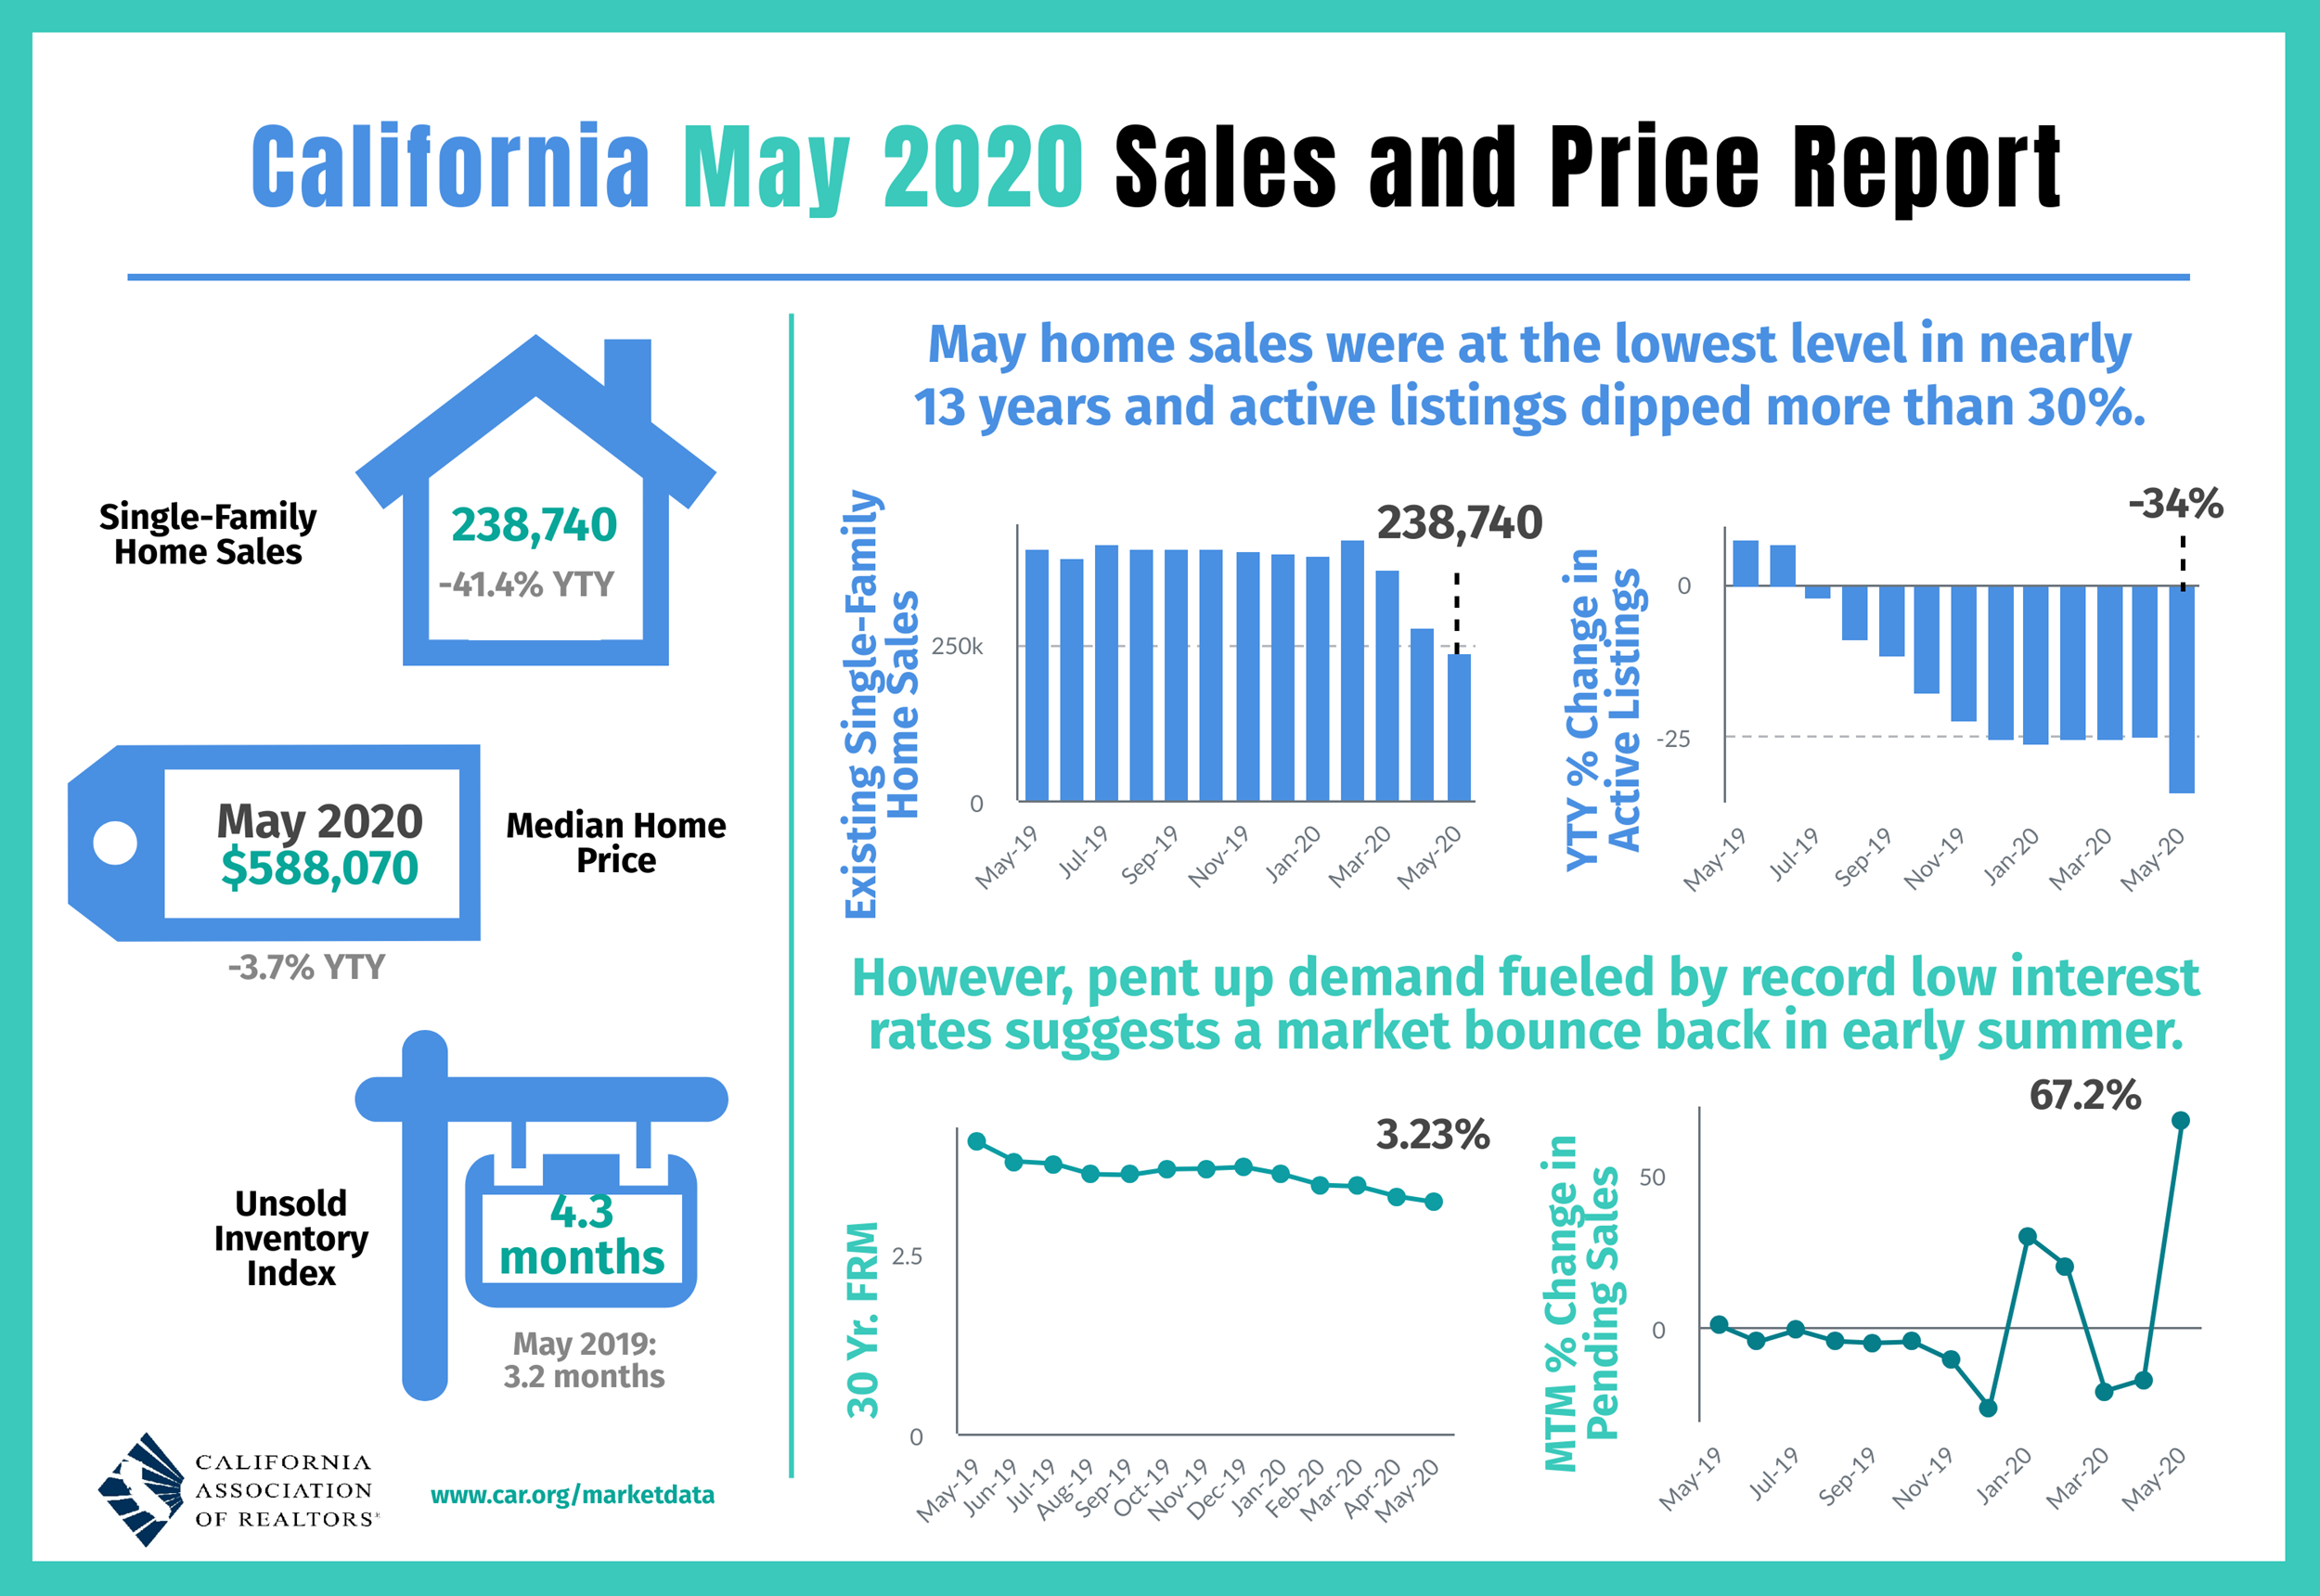 Us Home sales. Low interest rates. Reported price